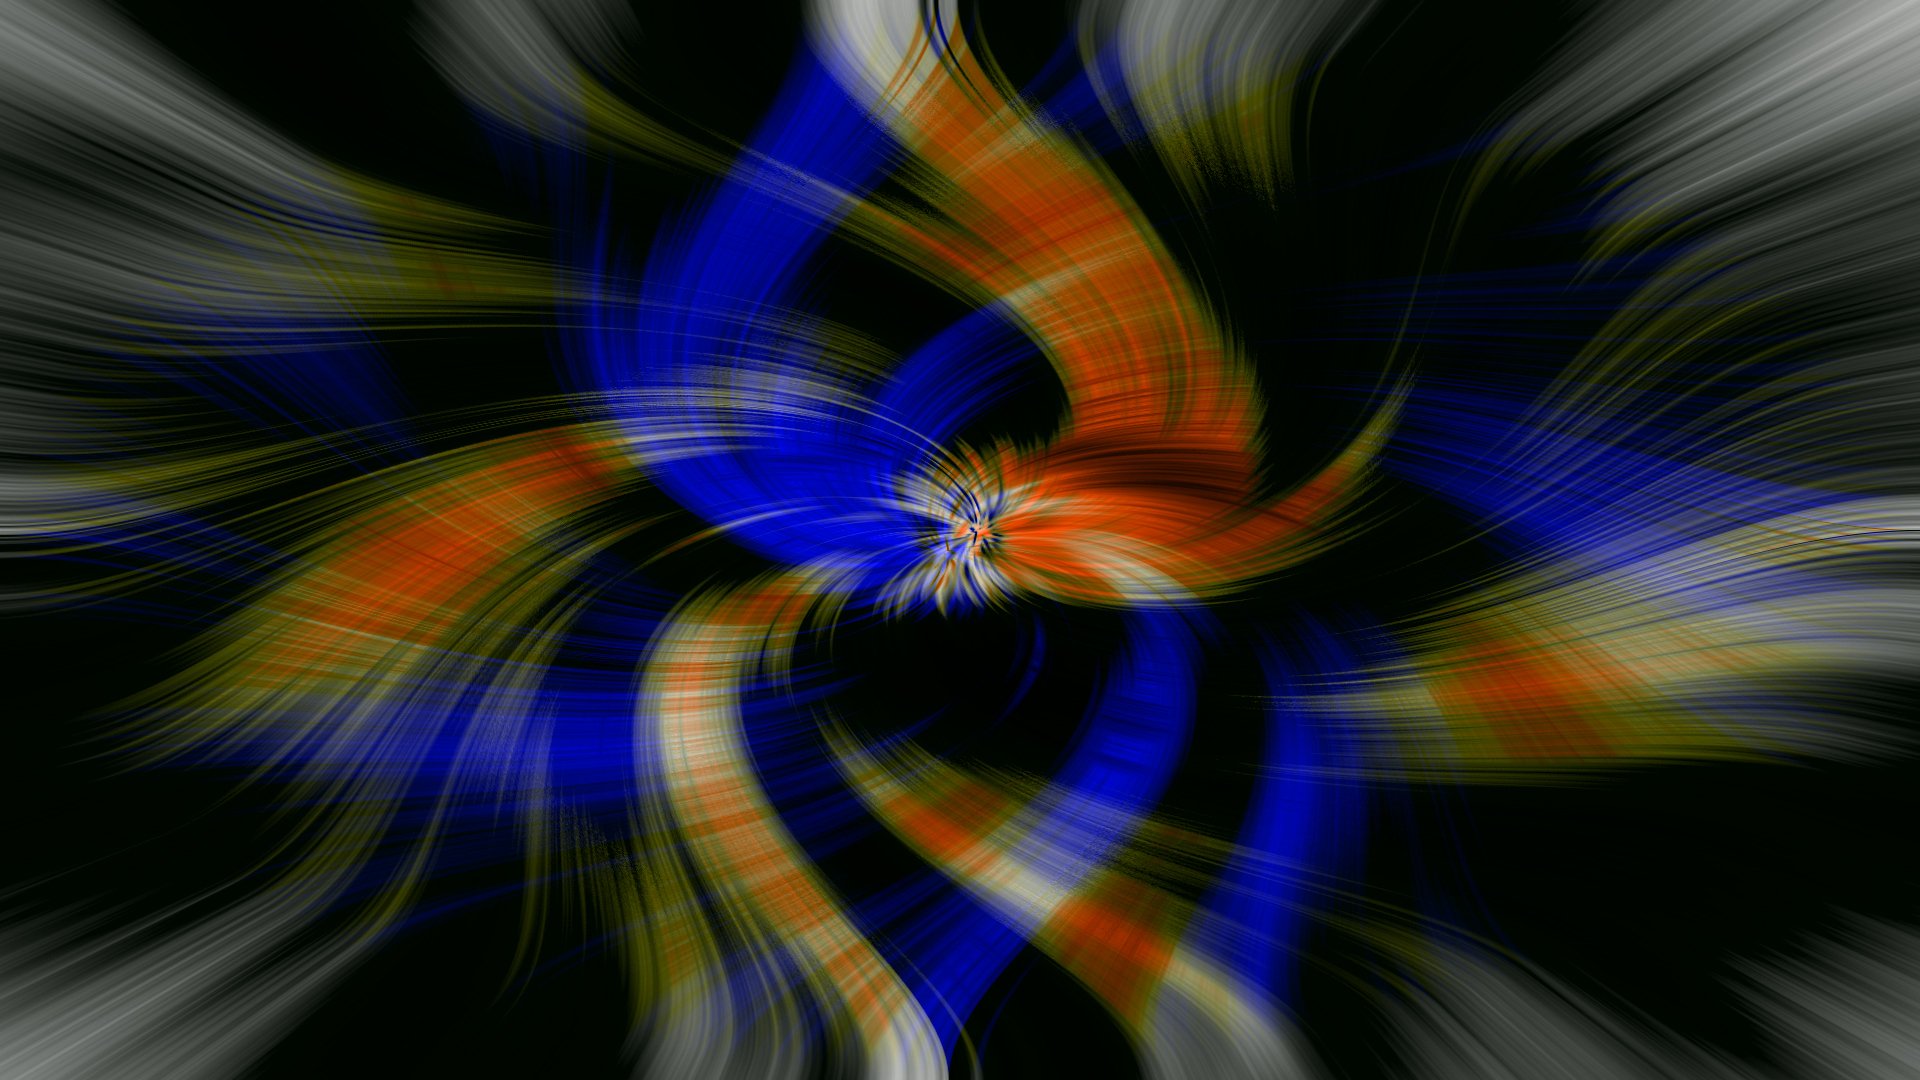 Abstract Swirl HD Wallpaper | Background Image | 1920x1080